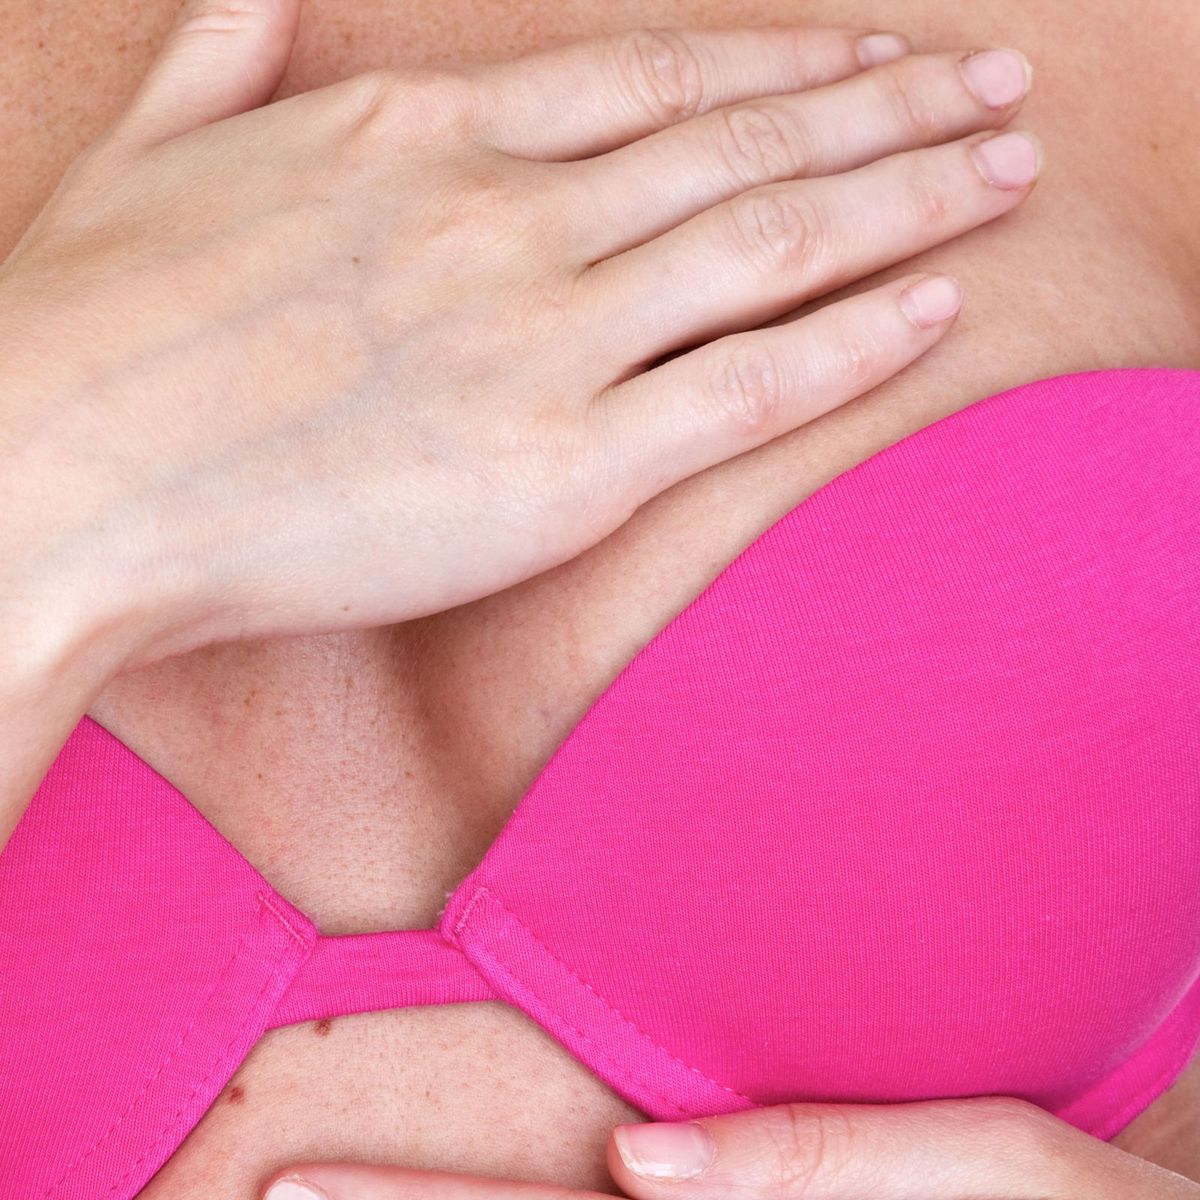 12 Signs of Breast Cancer - Common Breast Cancer Symptoms